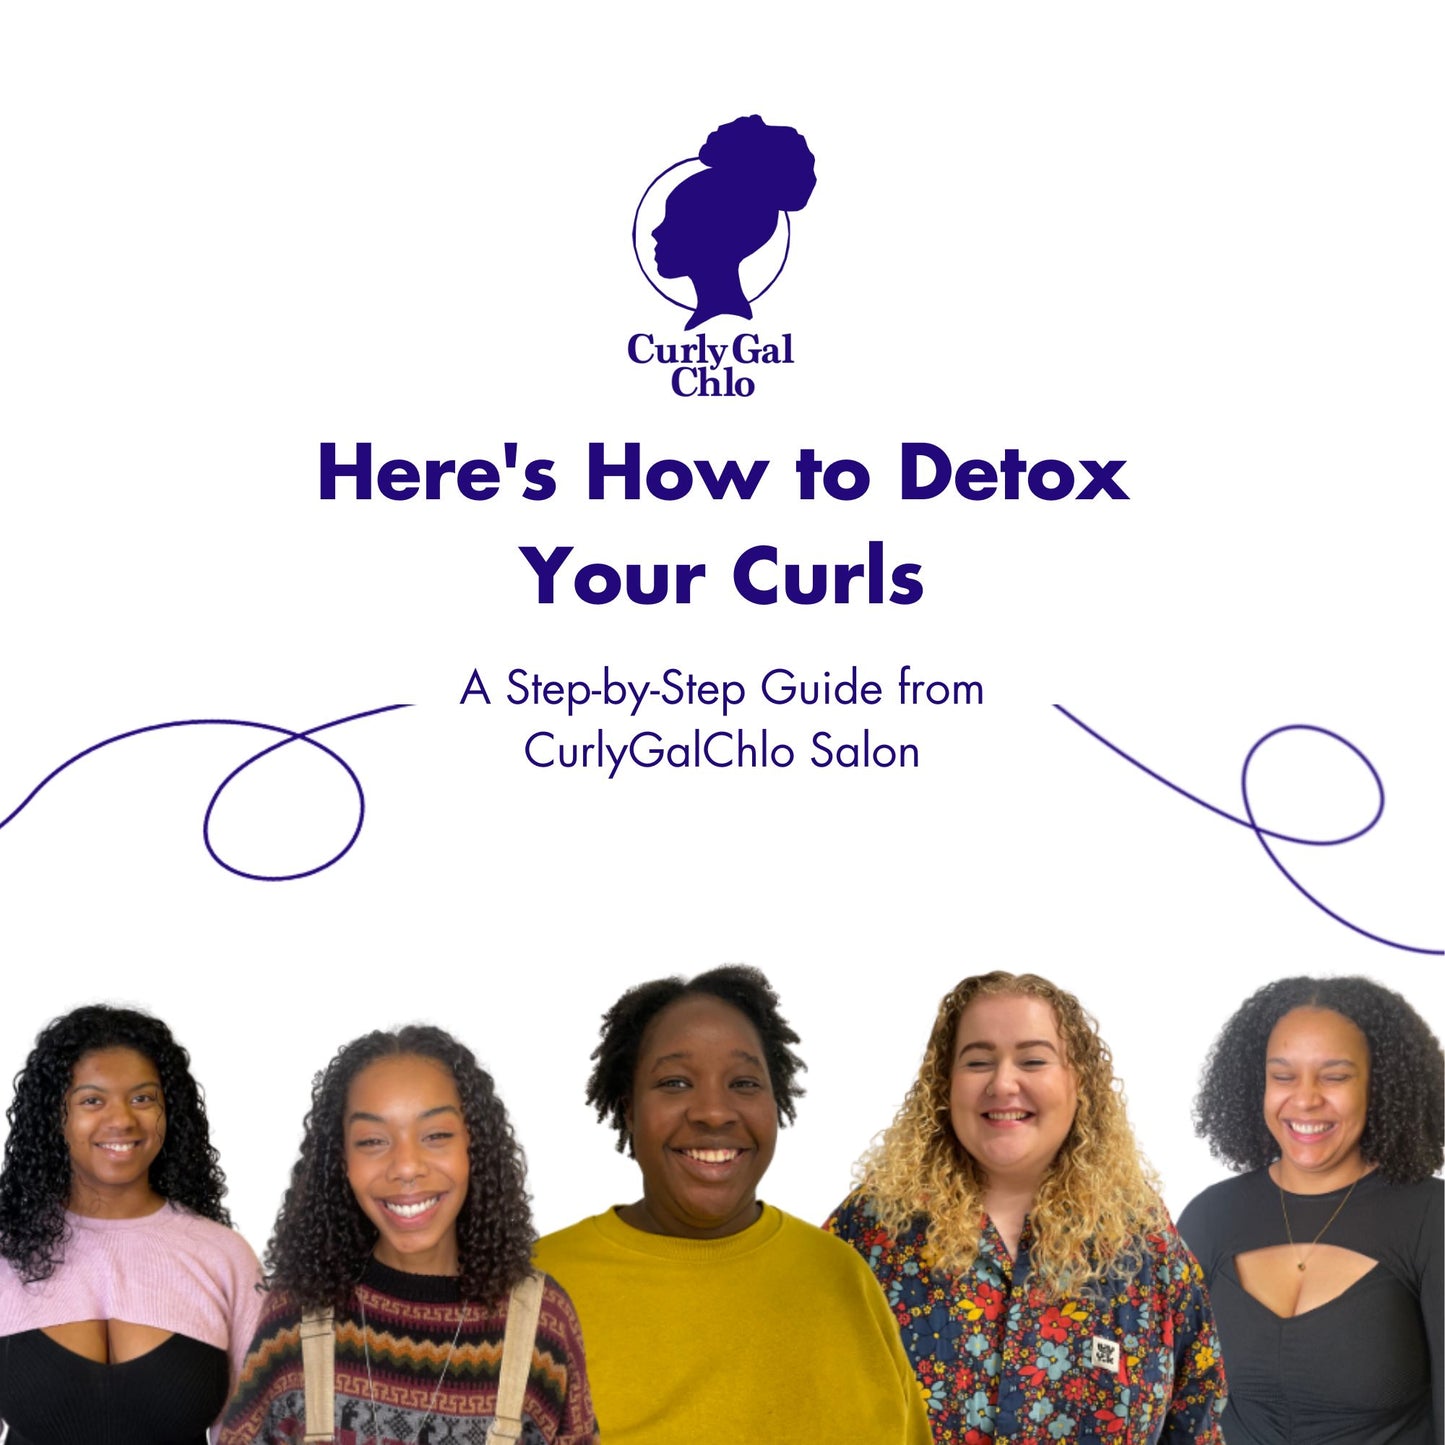 Curl Detox Guide by CurlyGalChlo Salon